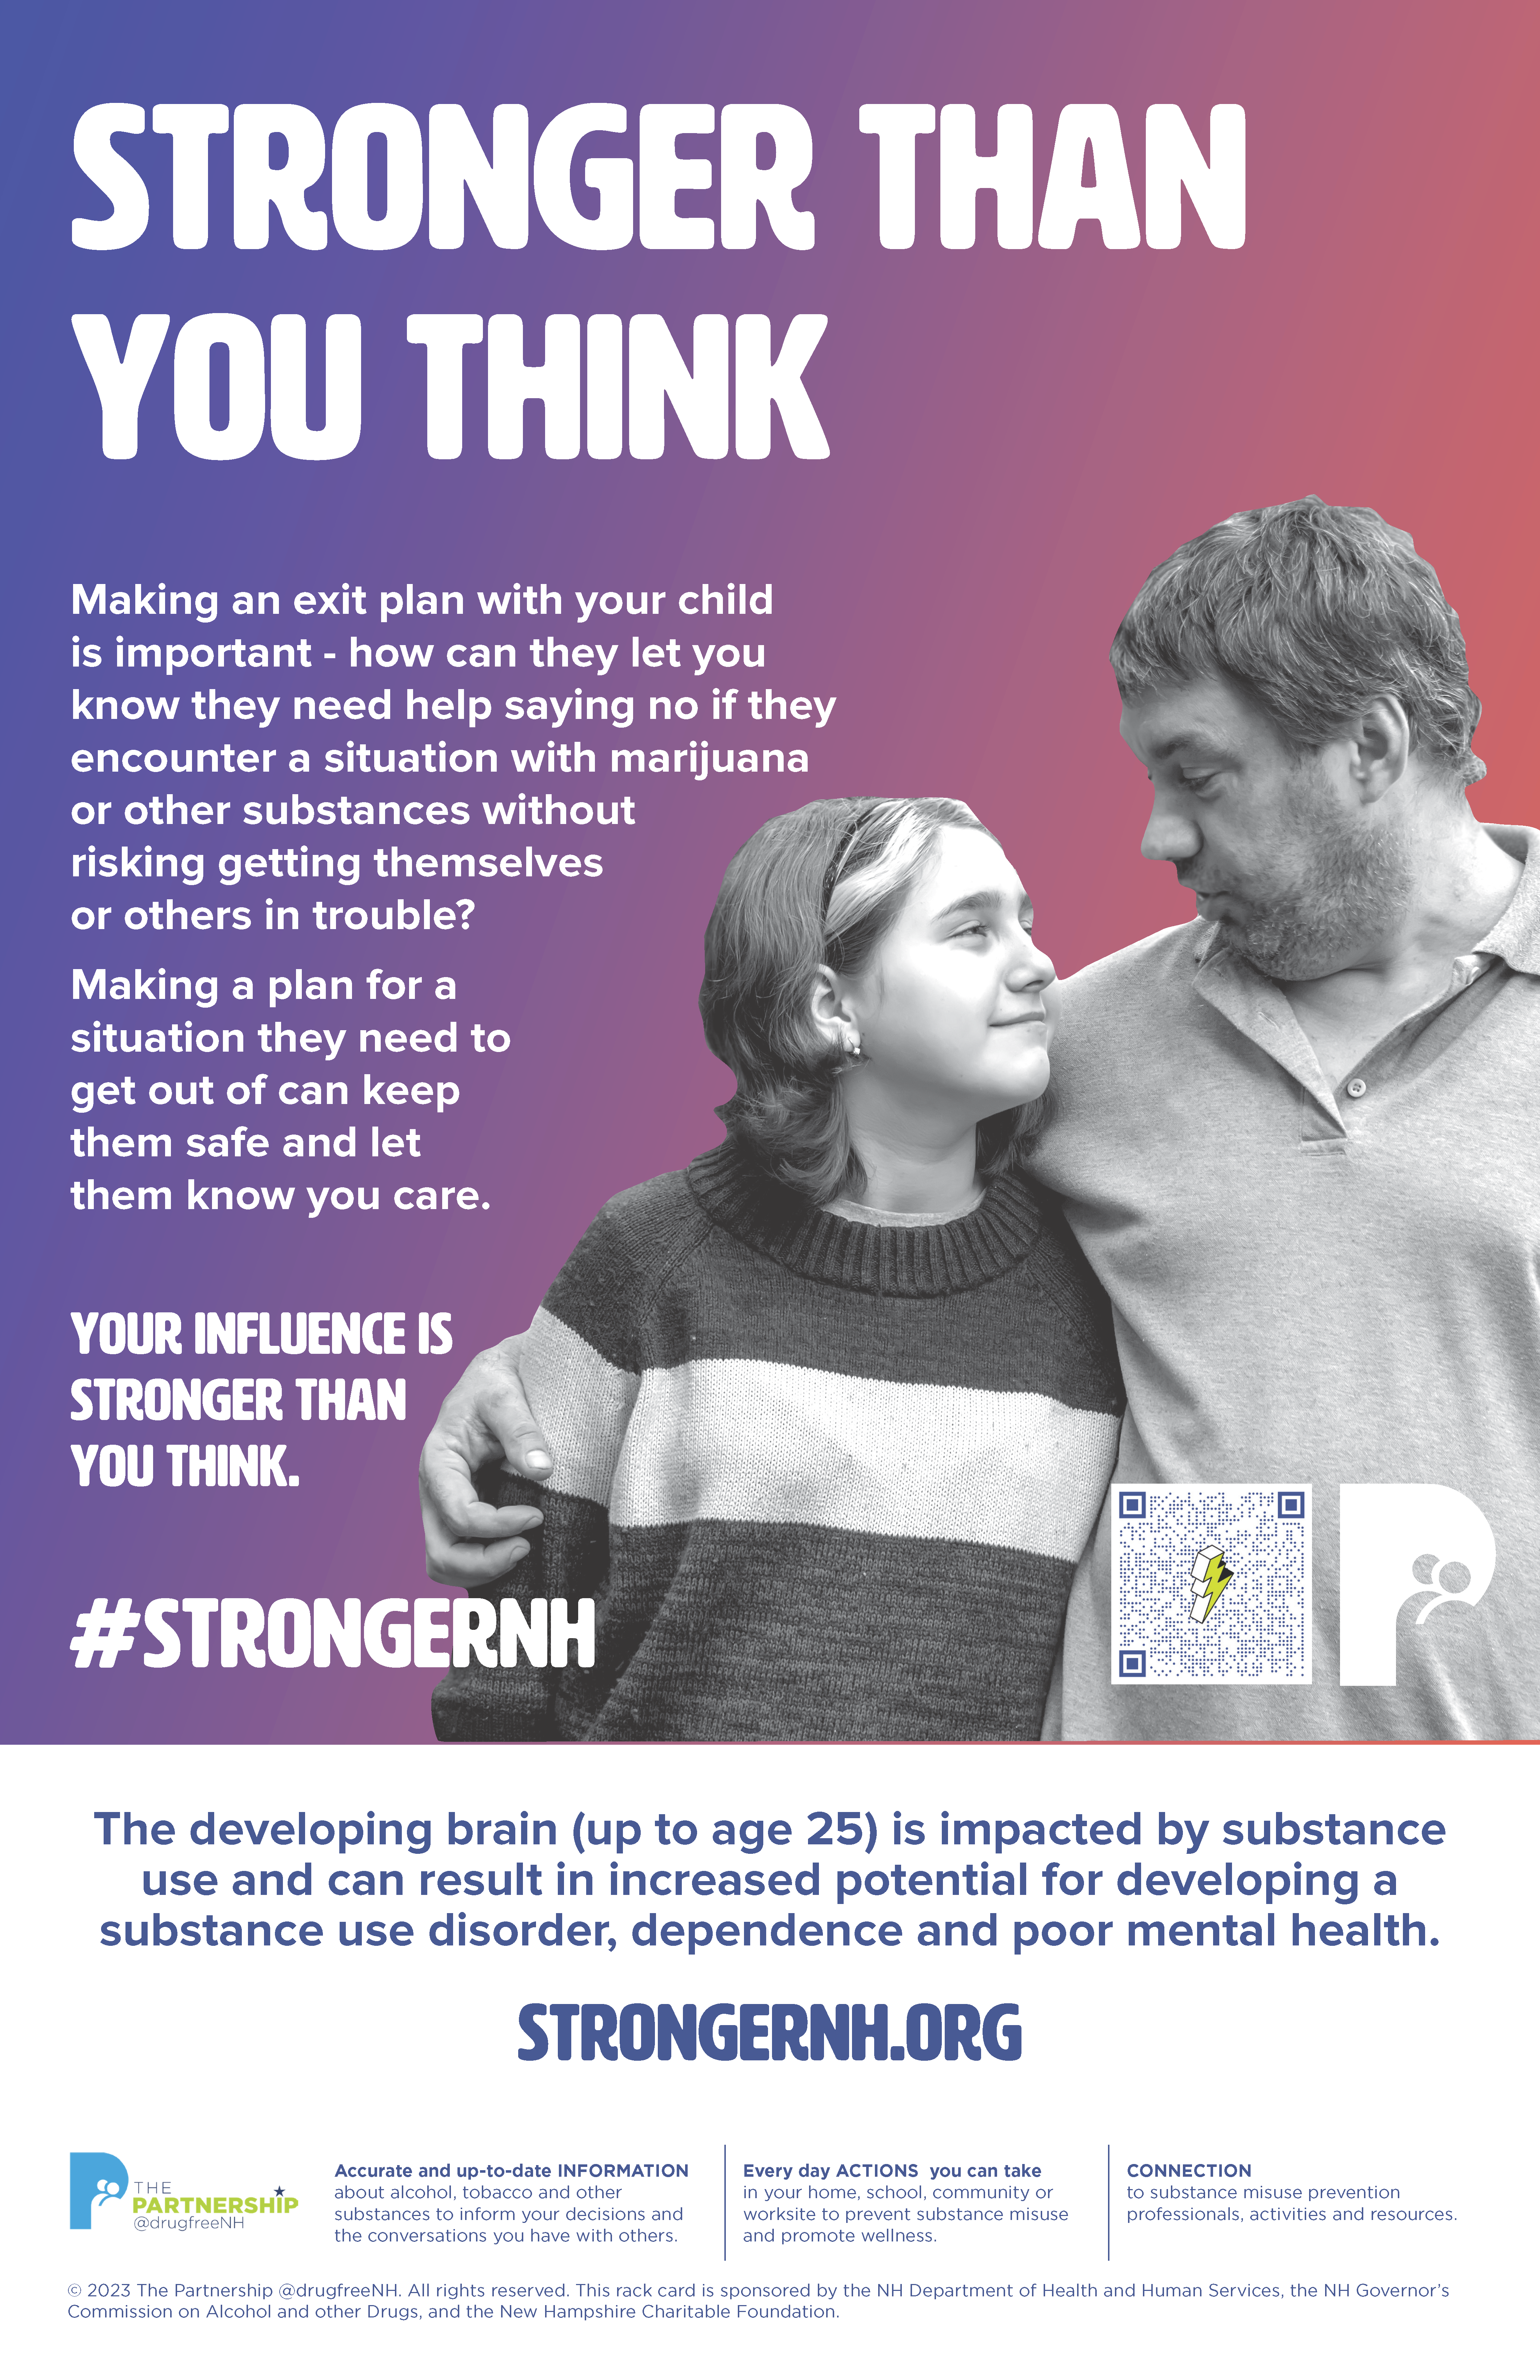 Your influence is stronger than you think. - Stronger Than You Think - campaign poster